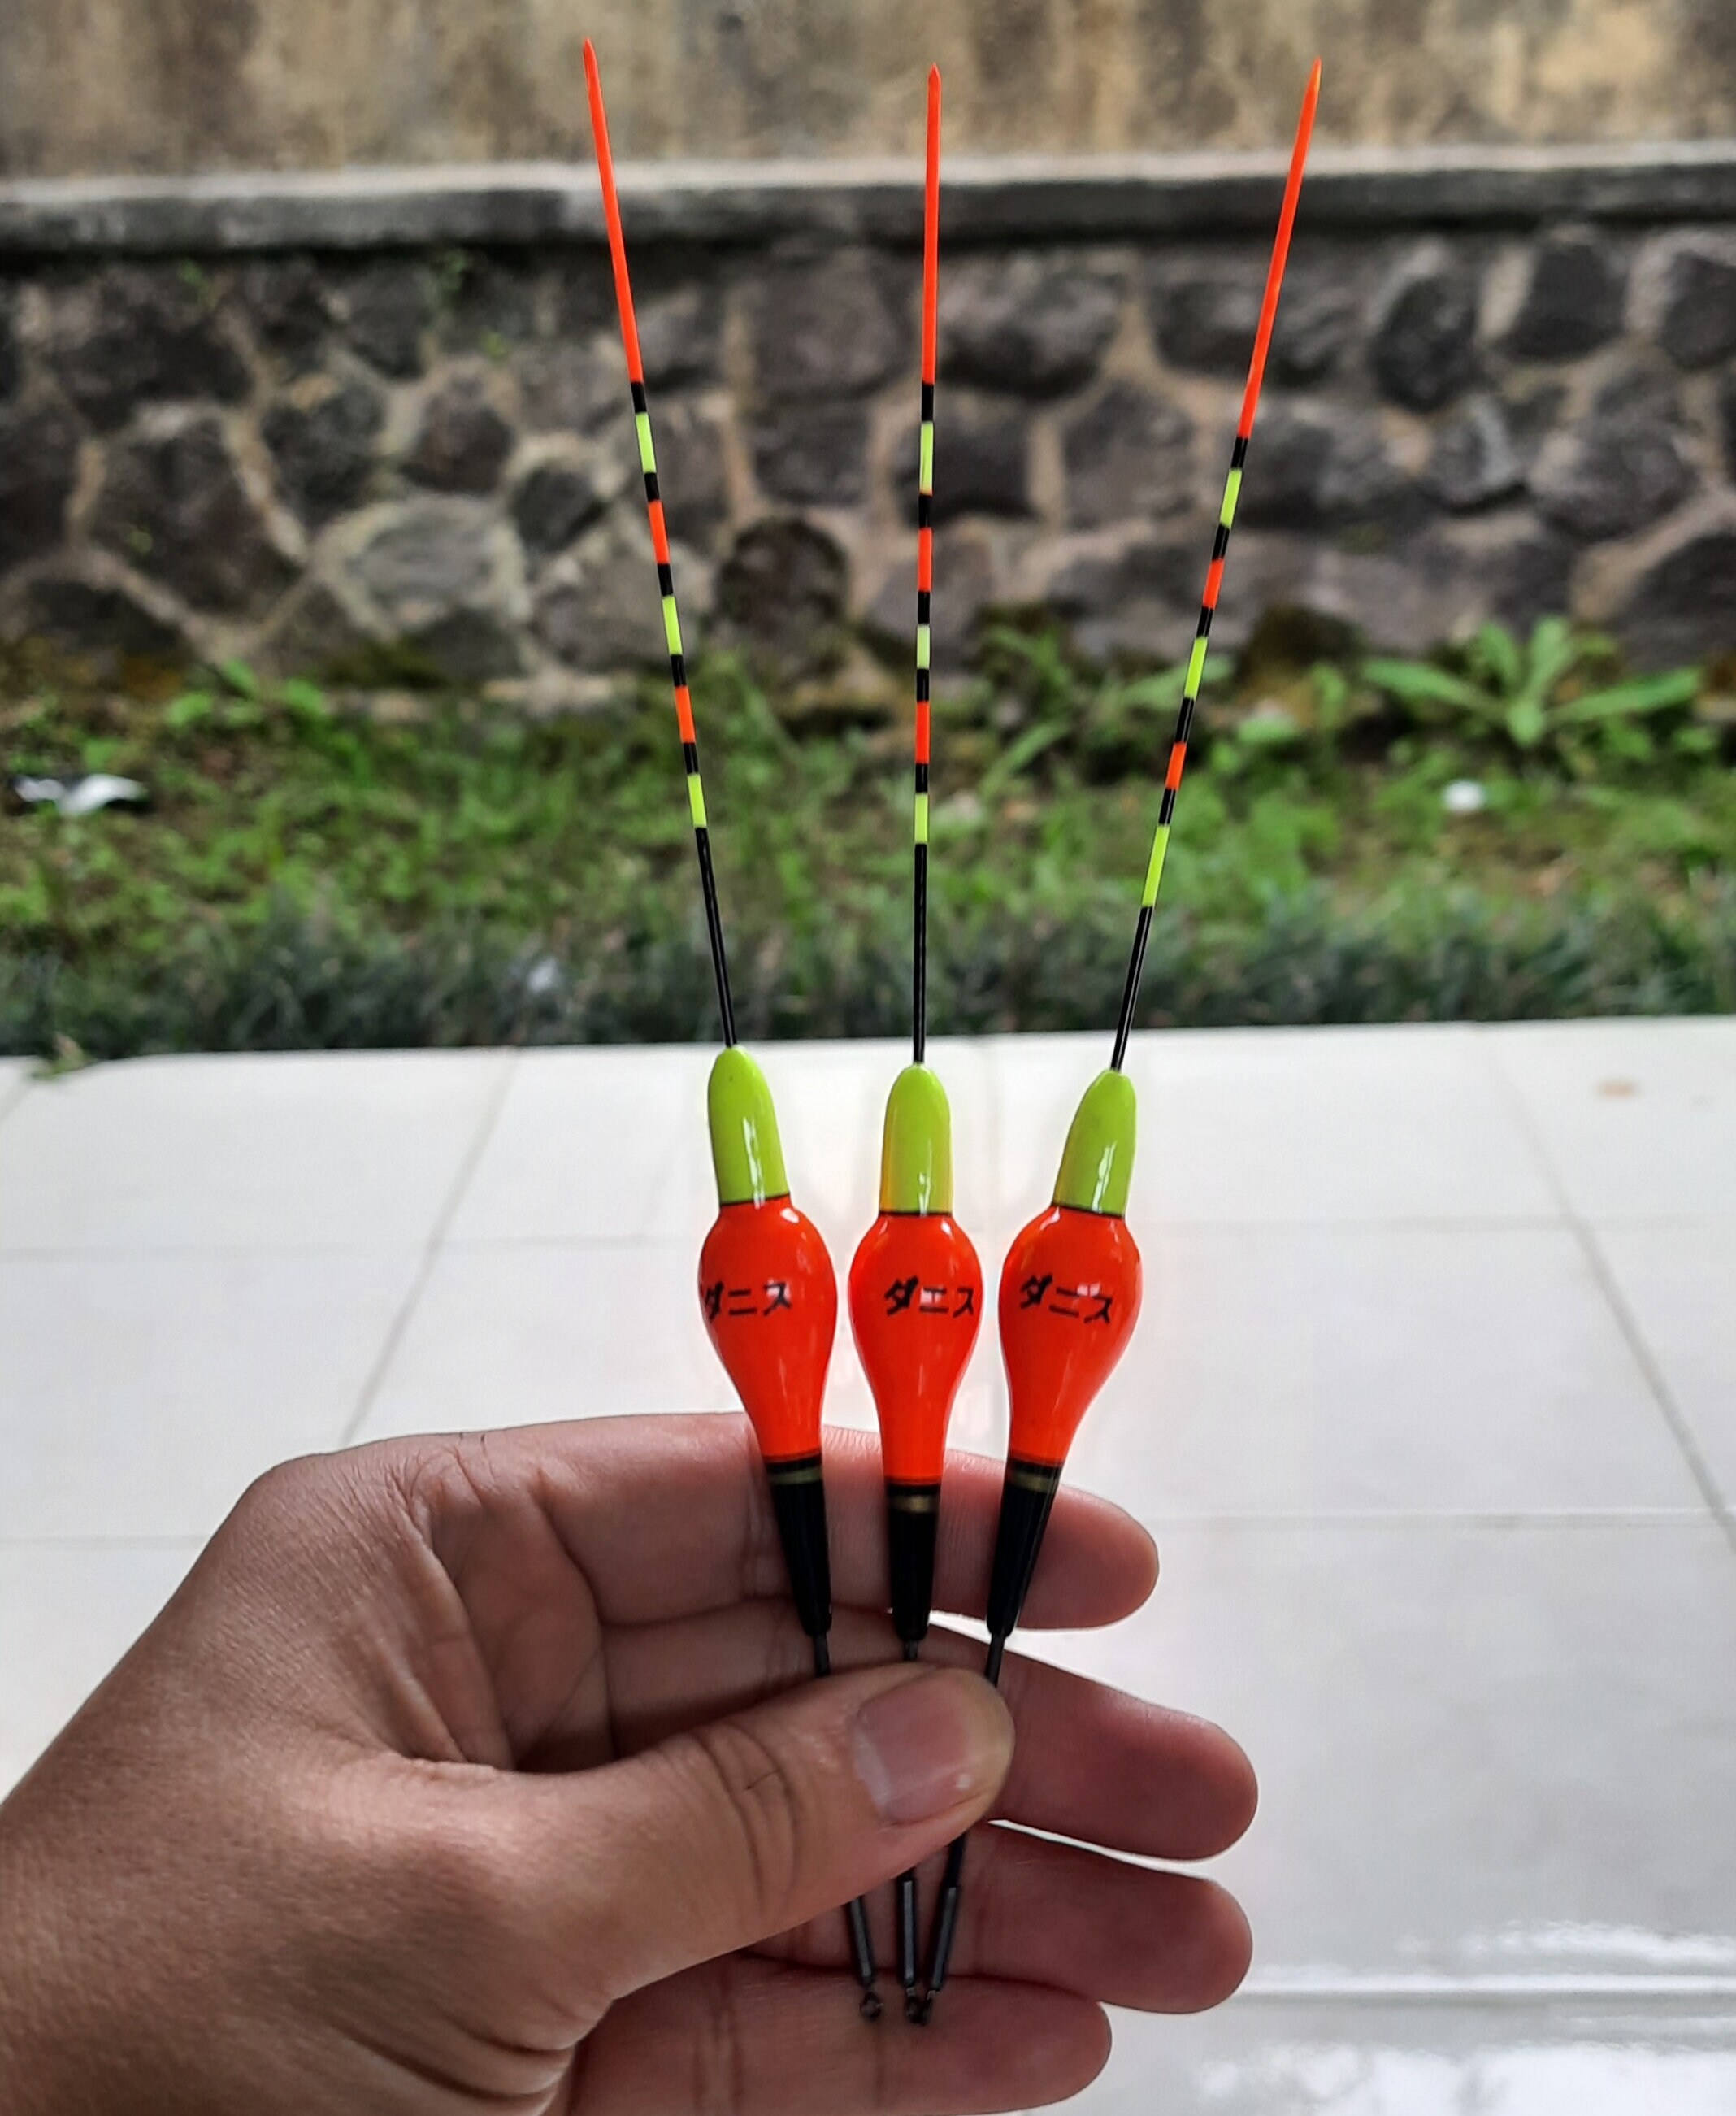 Handcrafted Long-length Waggler Floats, 5-pack, Delivering Maximum  Sensitivity and Stability for Precision Angling -  Australia